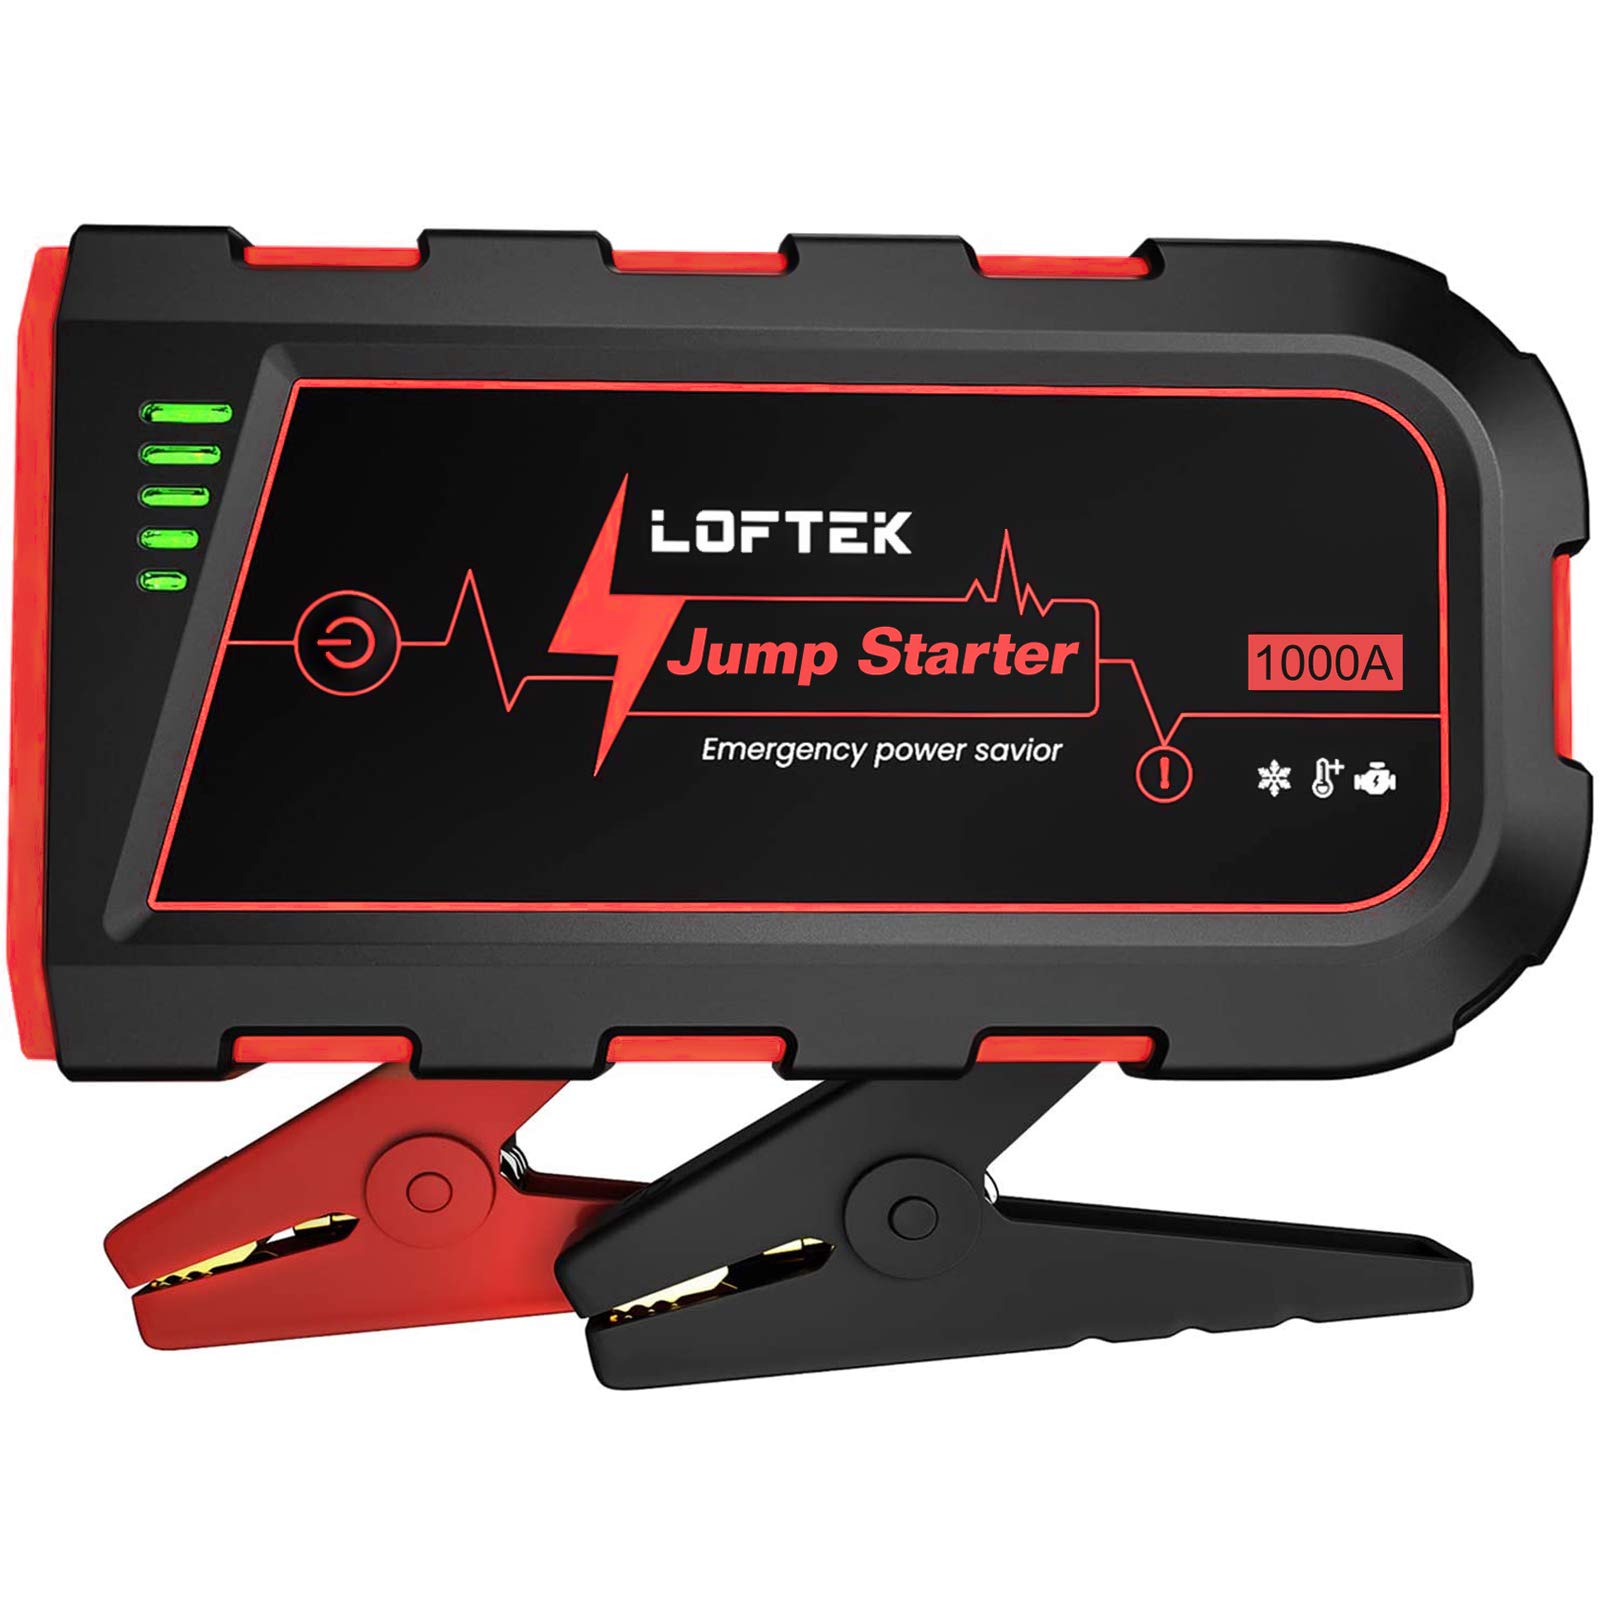 LOFTEK Portable Car Battery Jump Starter (Up to 7.0L Gas or 5.5L Diesel Engine), 12V Power Pack Auto Battery Booster with Built-in LED Light, Red